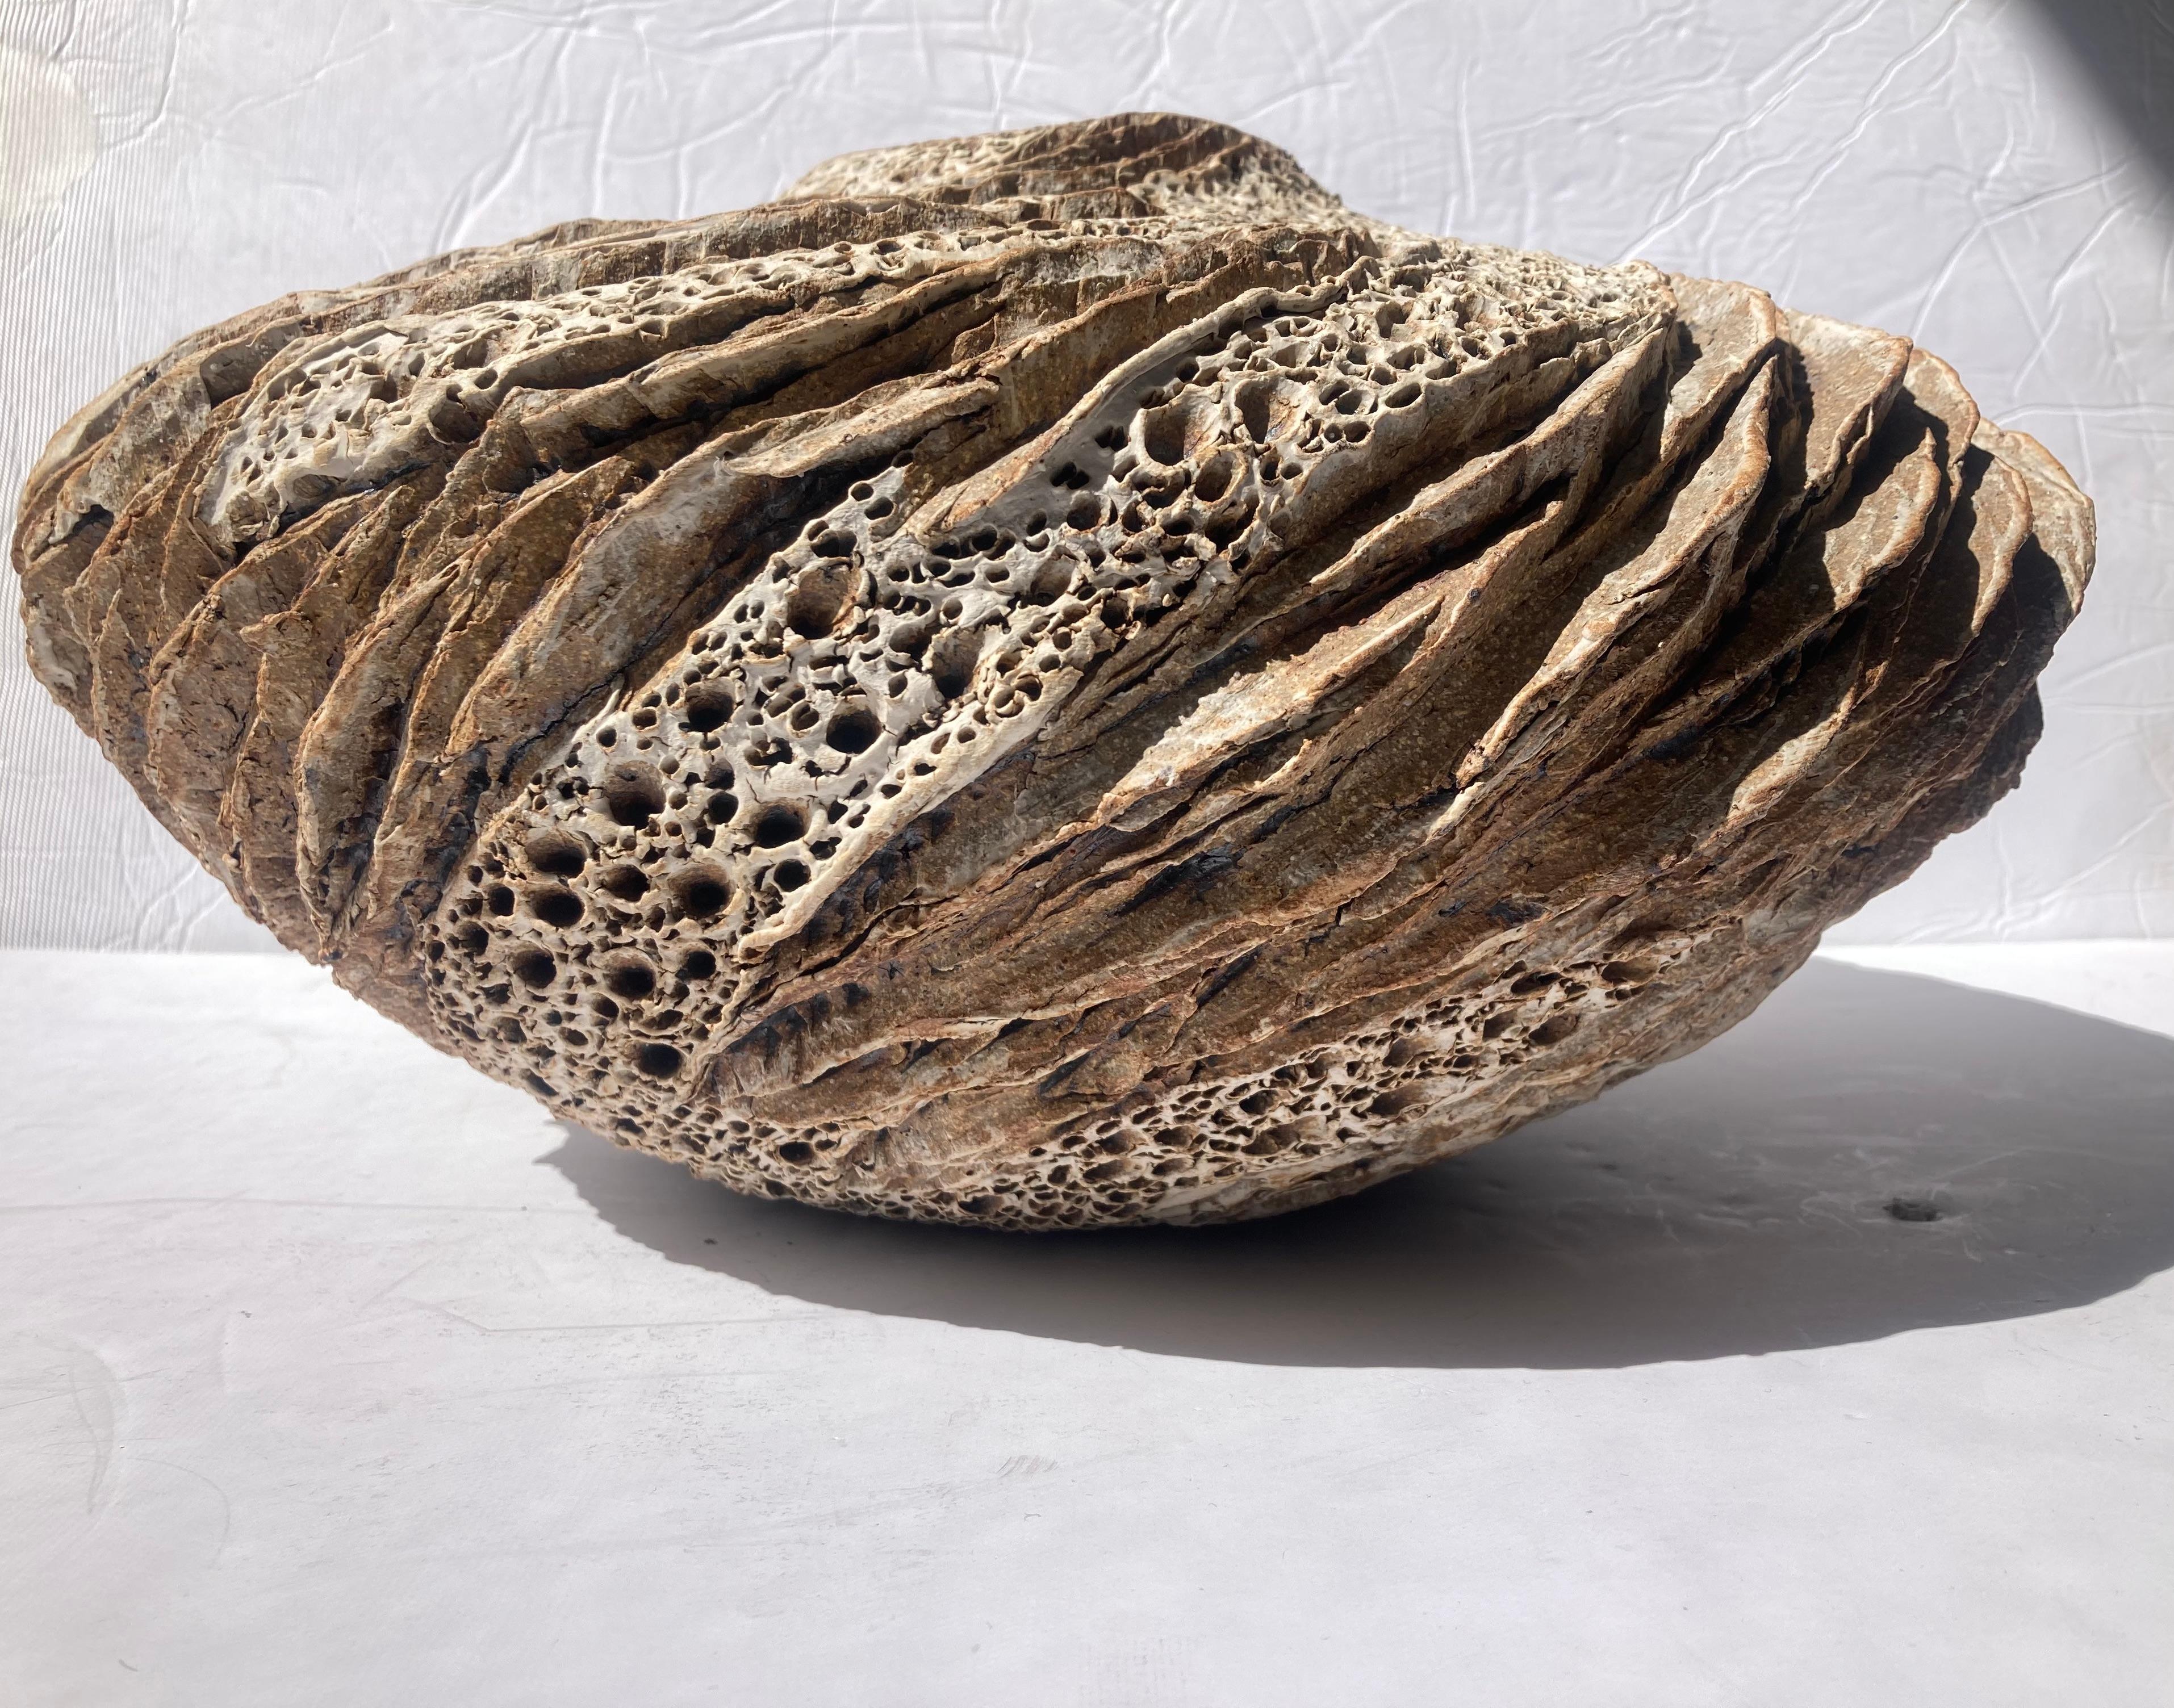 Amazing organic bowl very textured by the well known artist Anne Goldman . Her pieces are in Museums , Collections and Organizations all over the world .